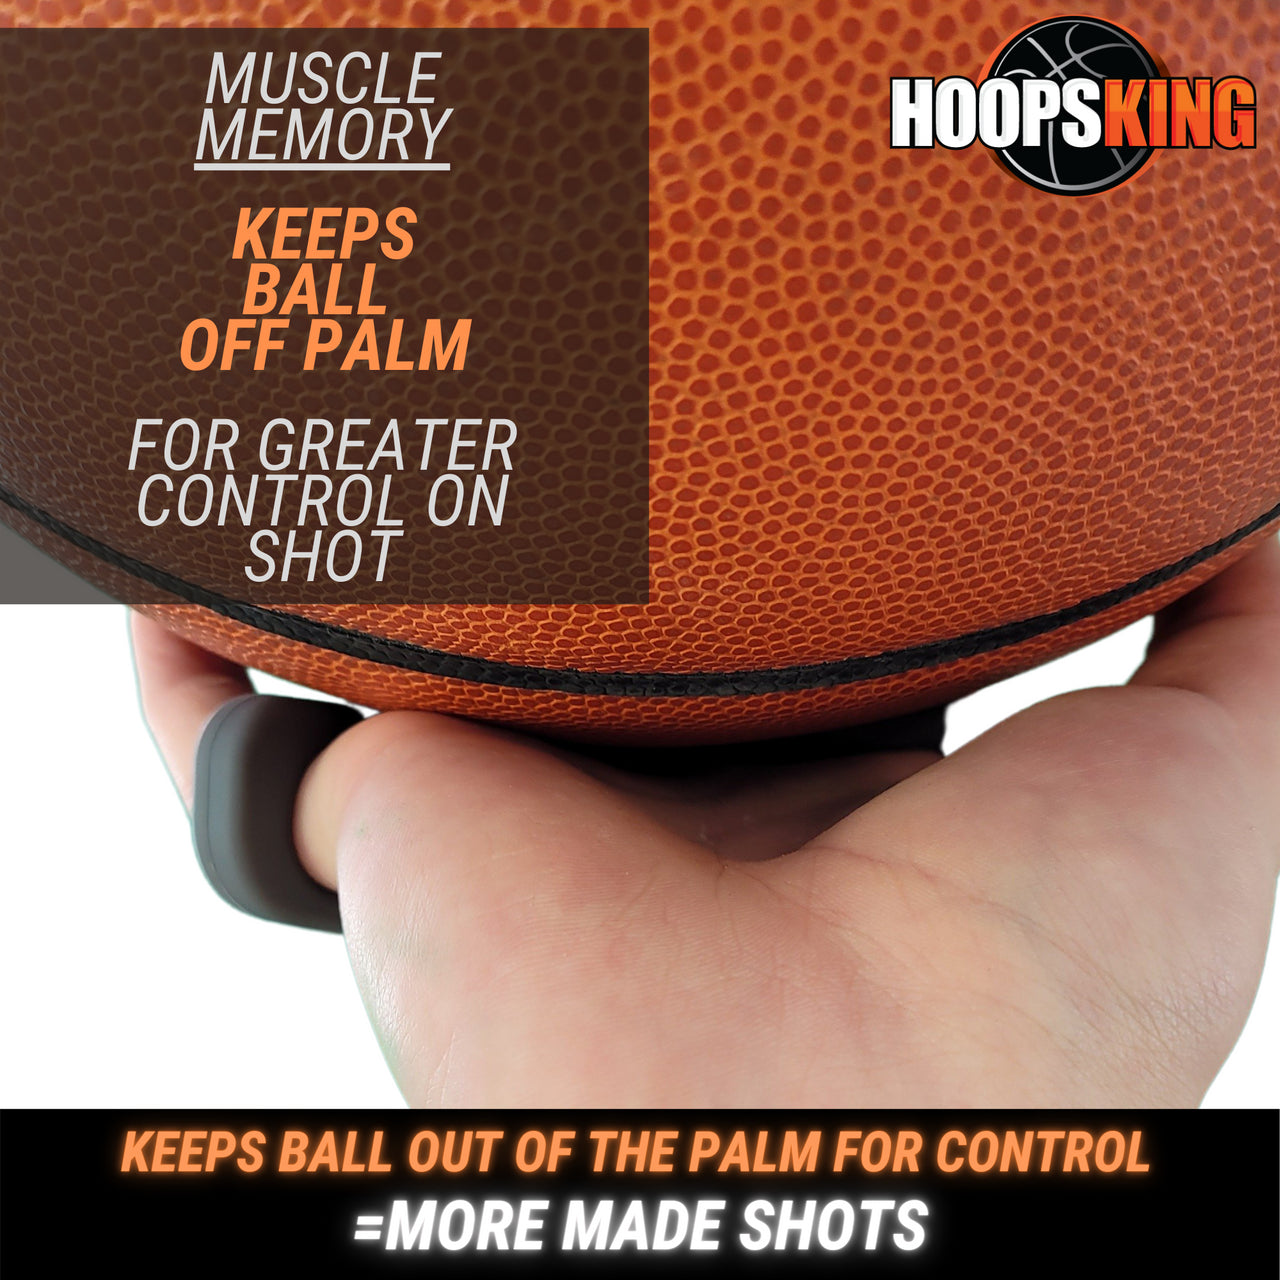 Keep Basketball Off the Palm When Shooting